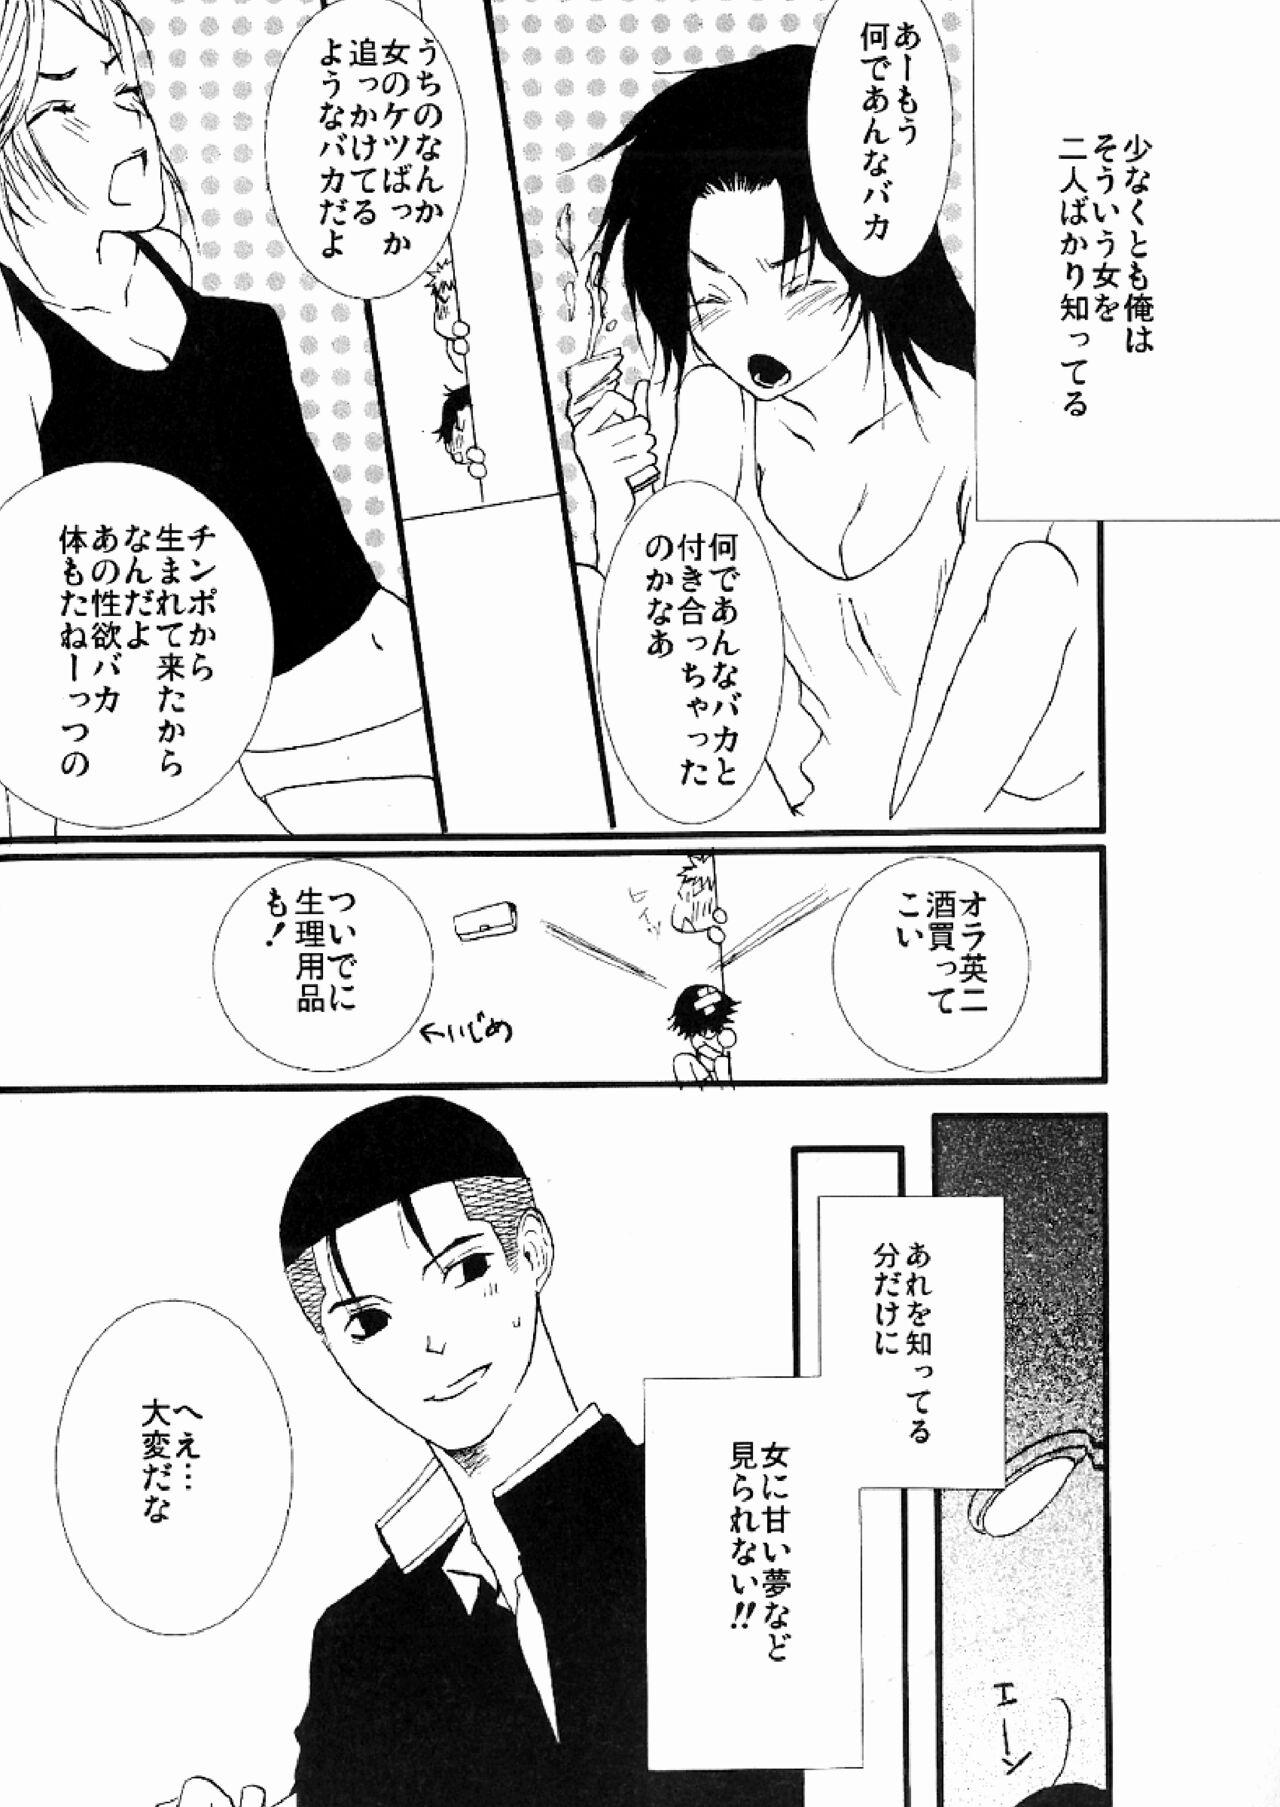 Cheating 3236 - Prince of tennis Cutie - Page 6